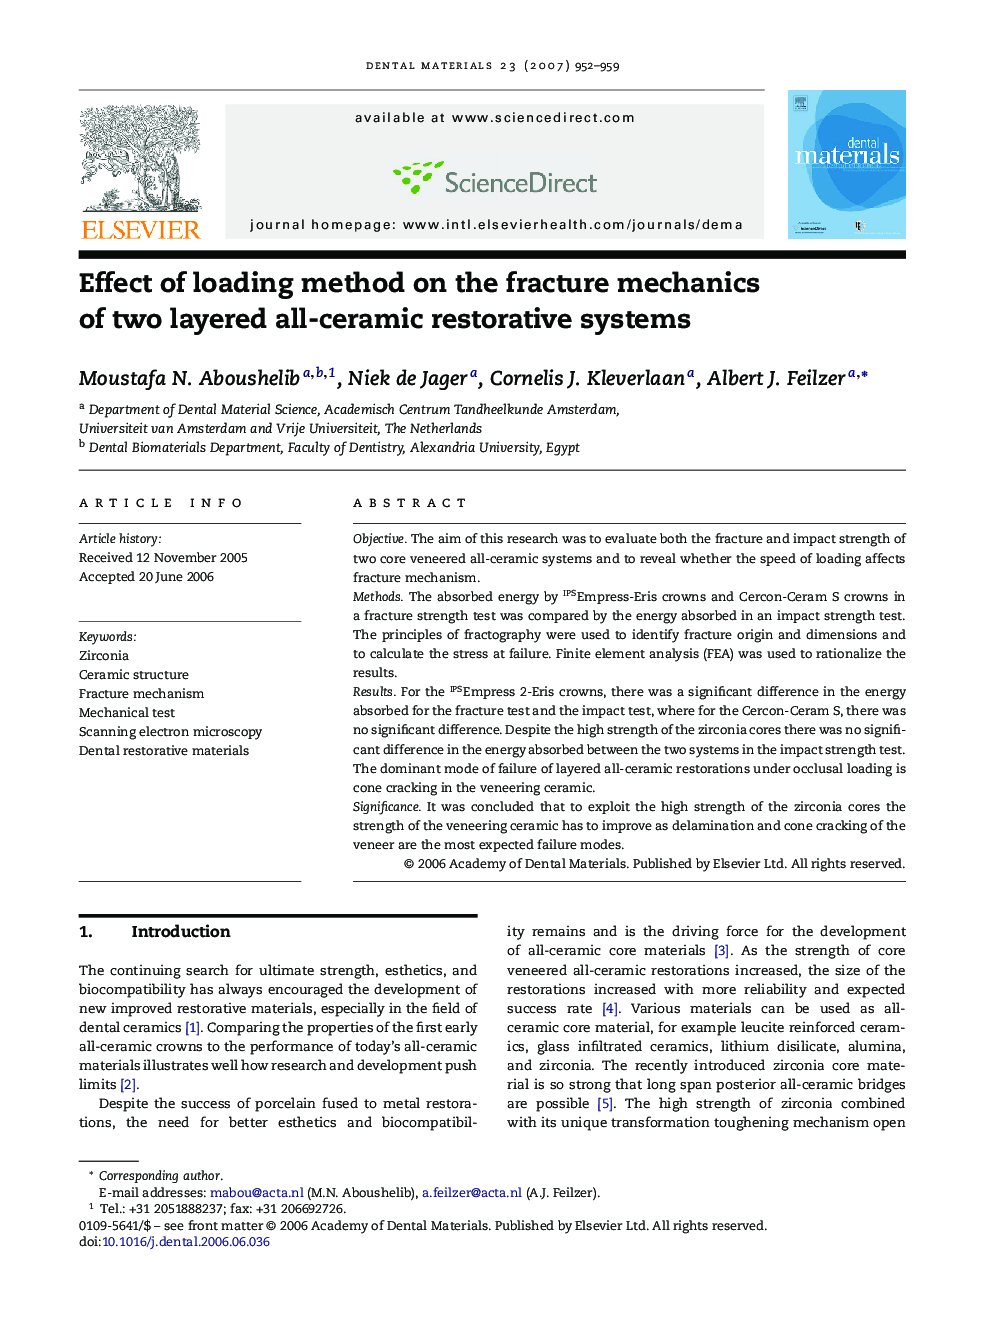 Effect of loading method on the fracture mechanics of two layered all-ceramic restorative systems